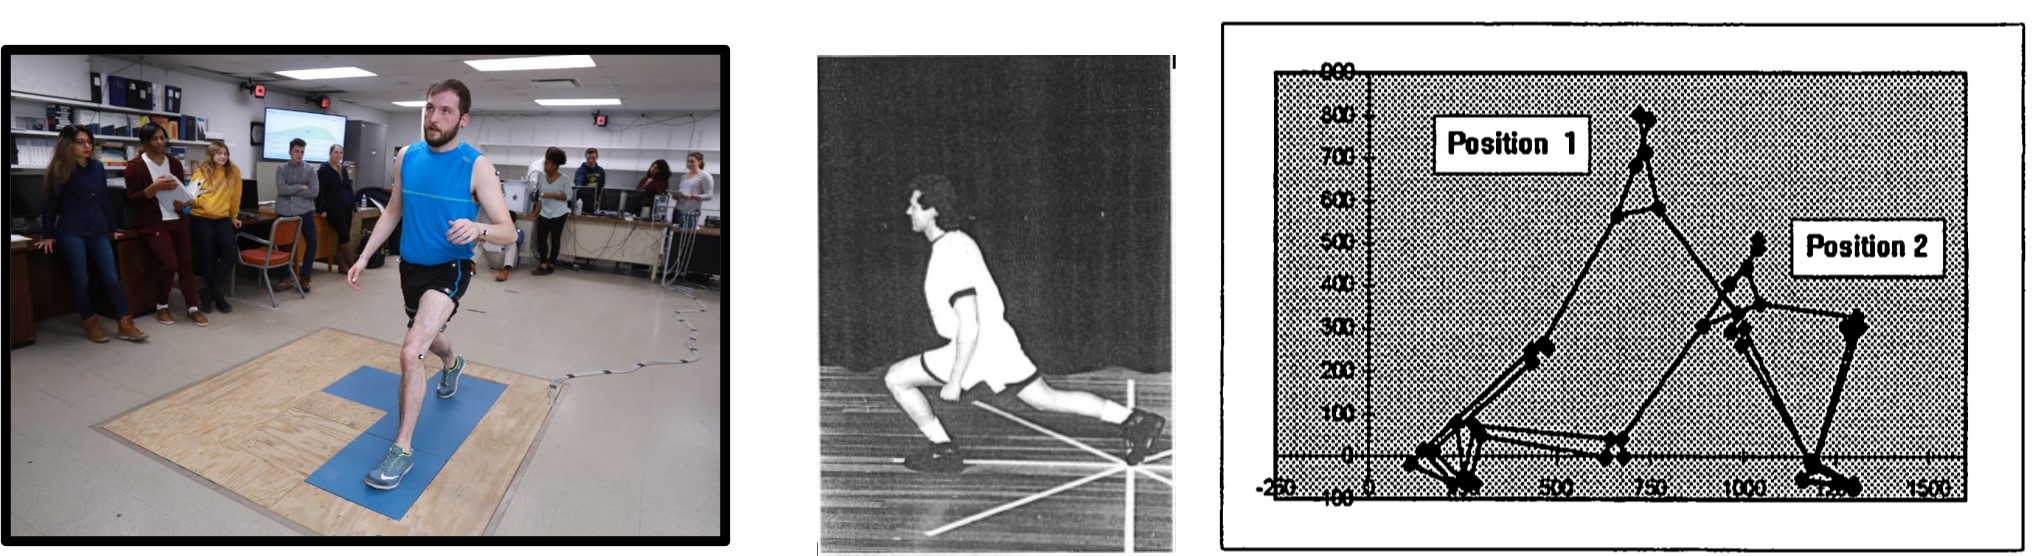 student lunging in biomechanics lab, old picture of man lunging, and charg of lunging positions